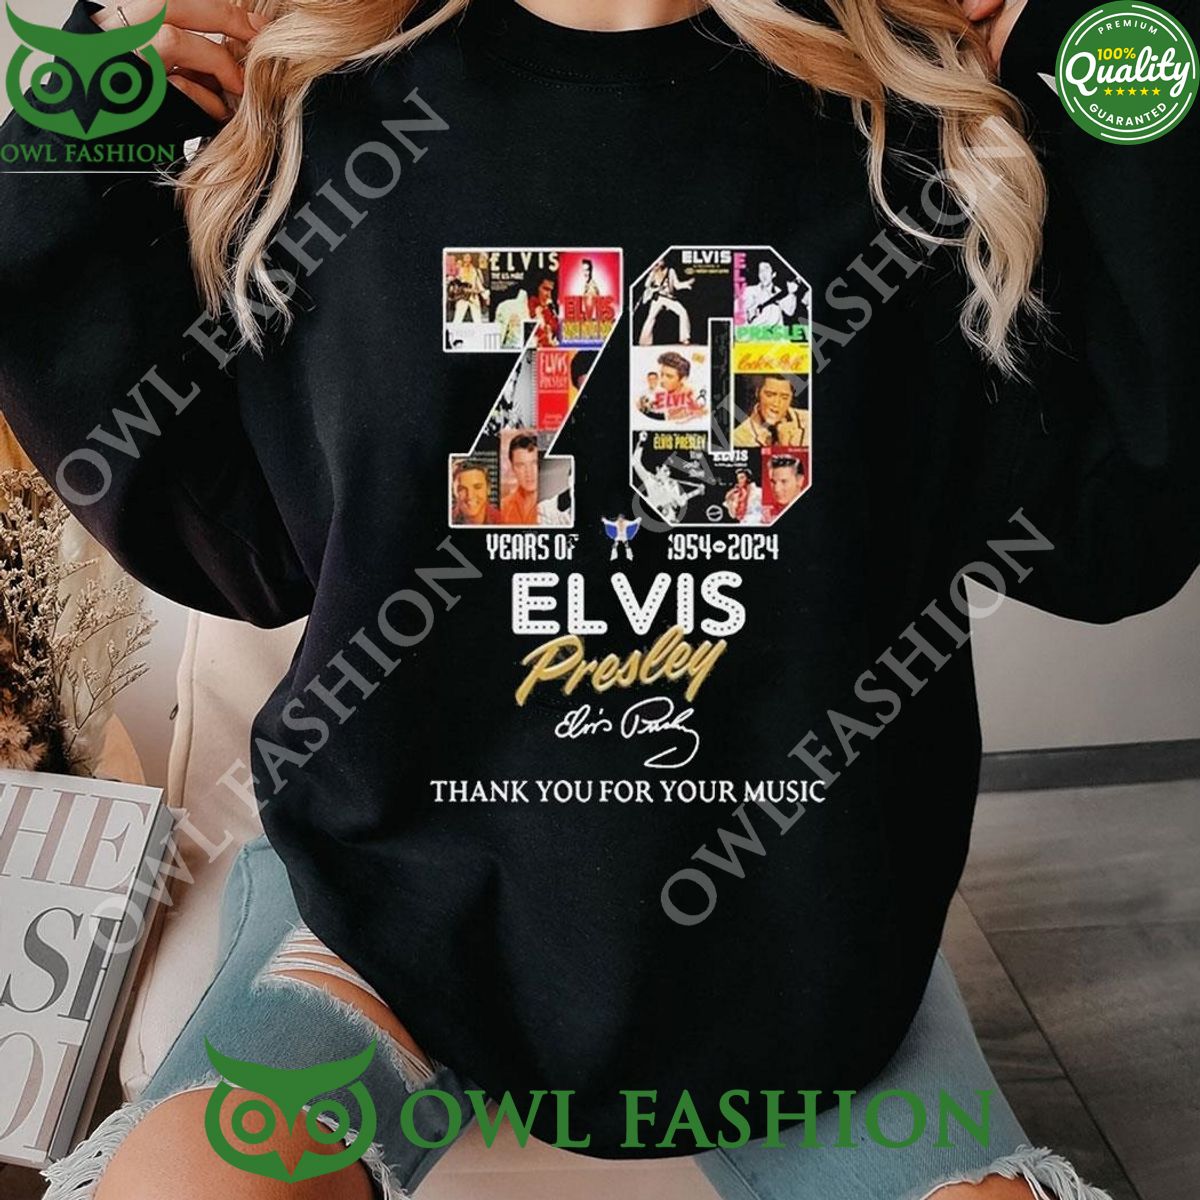 70 years of 1954 2024 elvis presley thank you for your music official t shirt 1 ad2qv.jpg